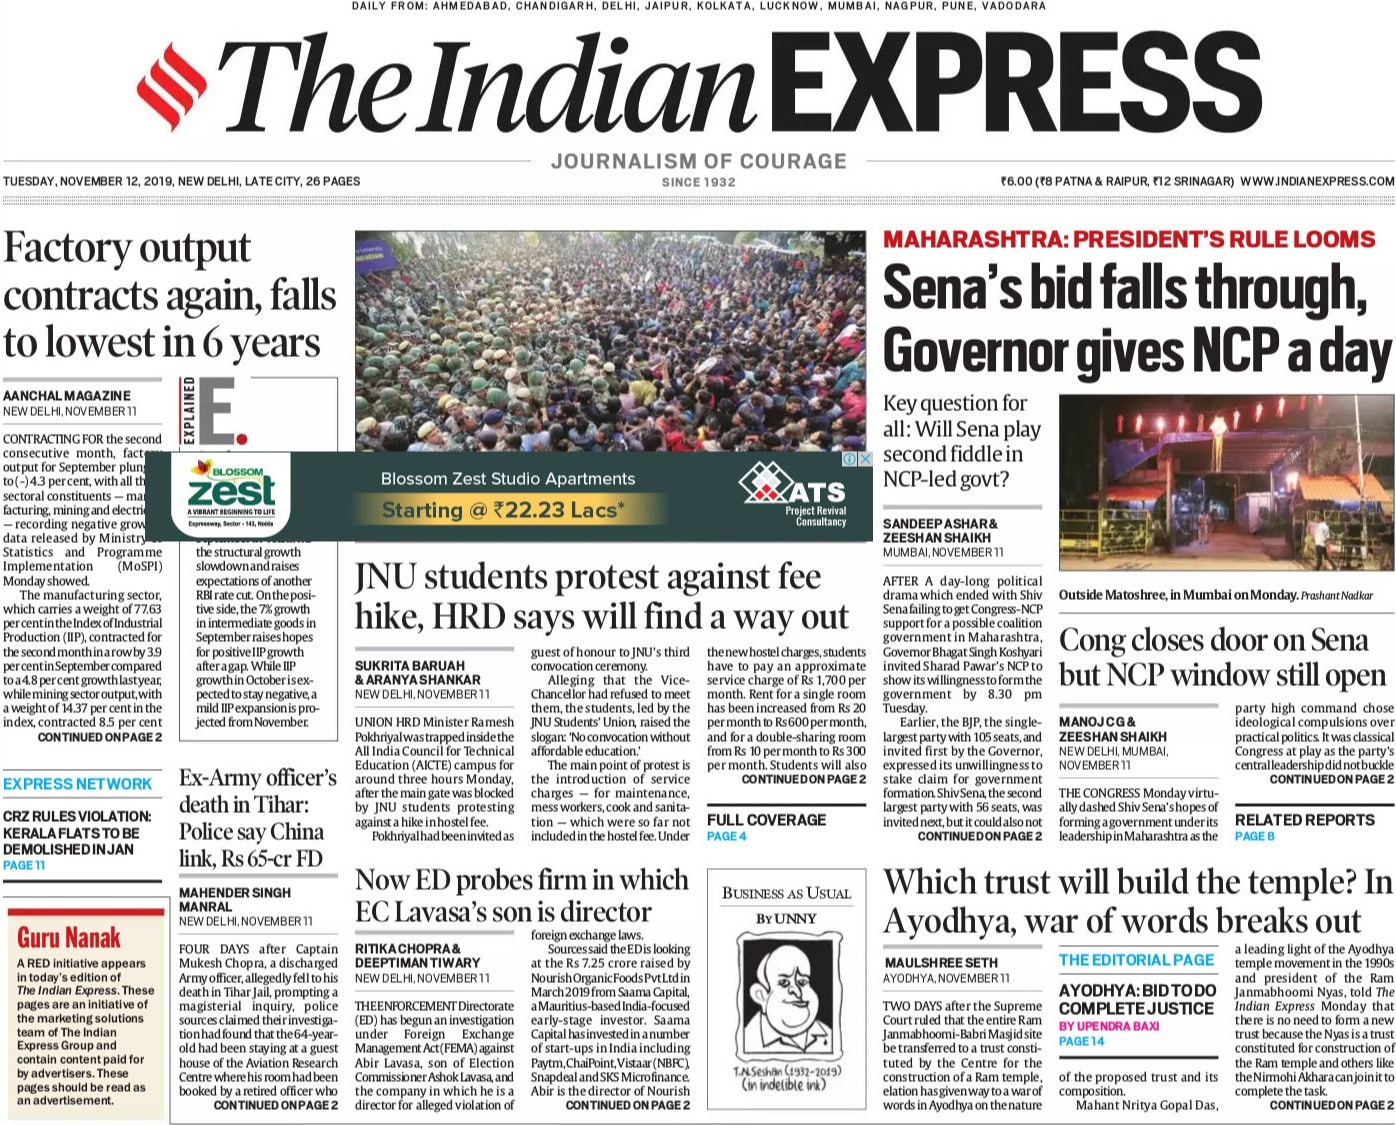 Newspaper Headlines: Maharashtra Governor Invites Ncp To Form Government, Other Big Stories